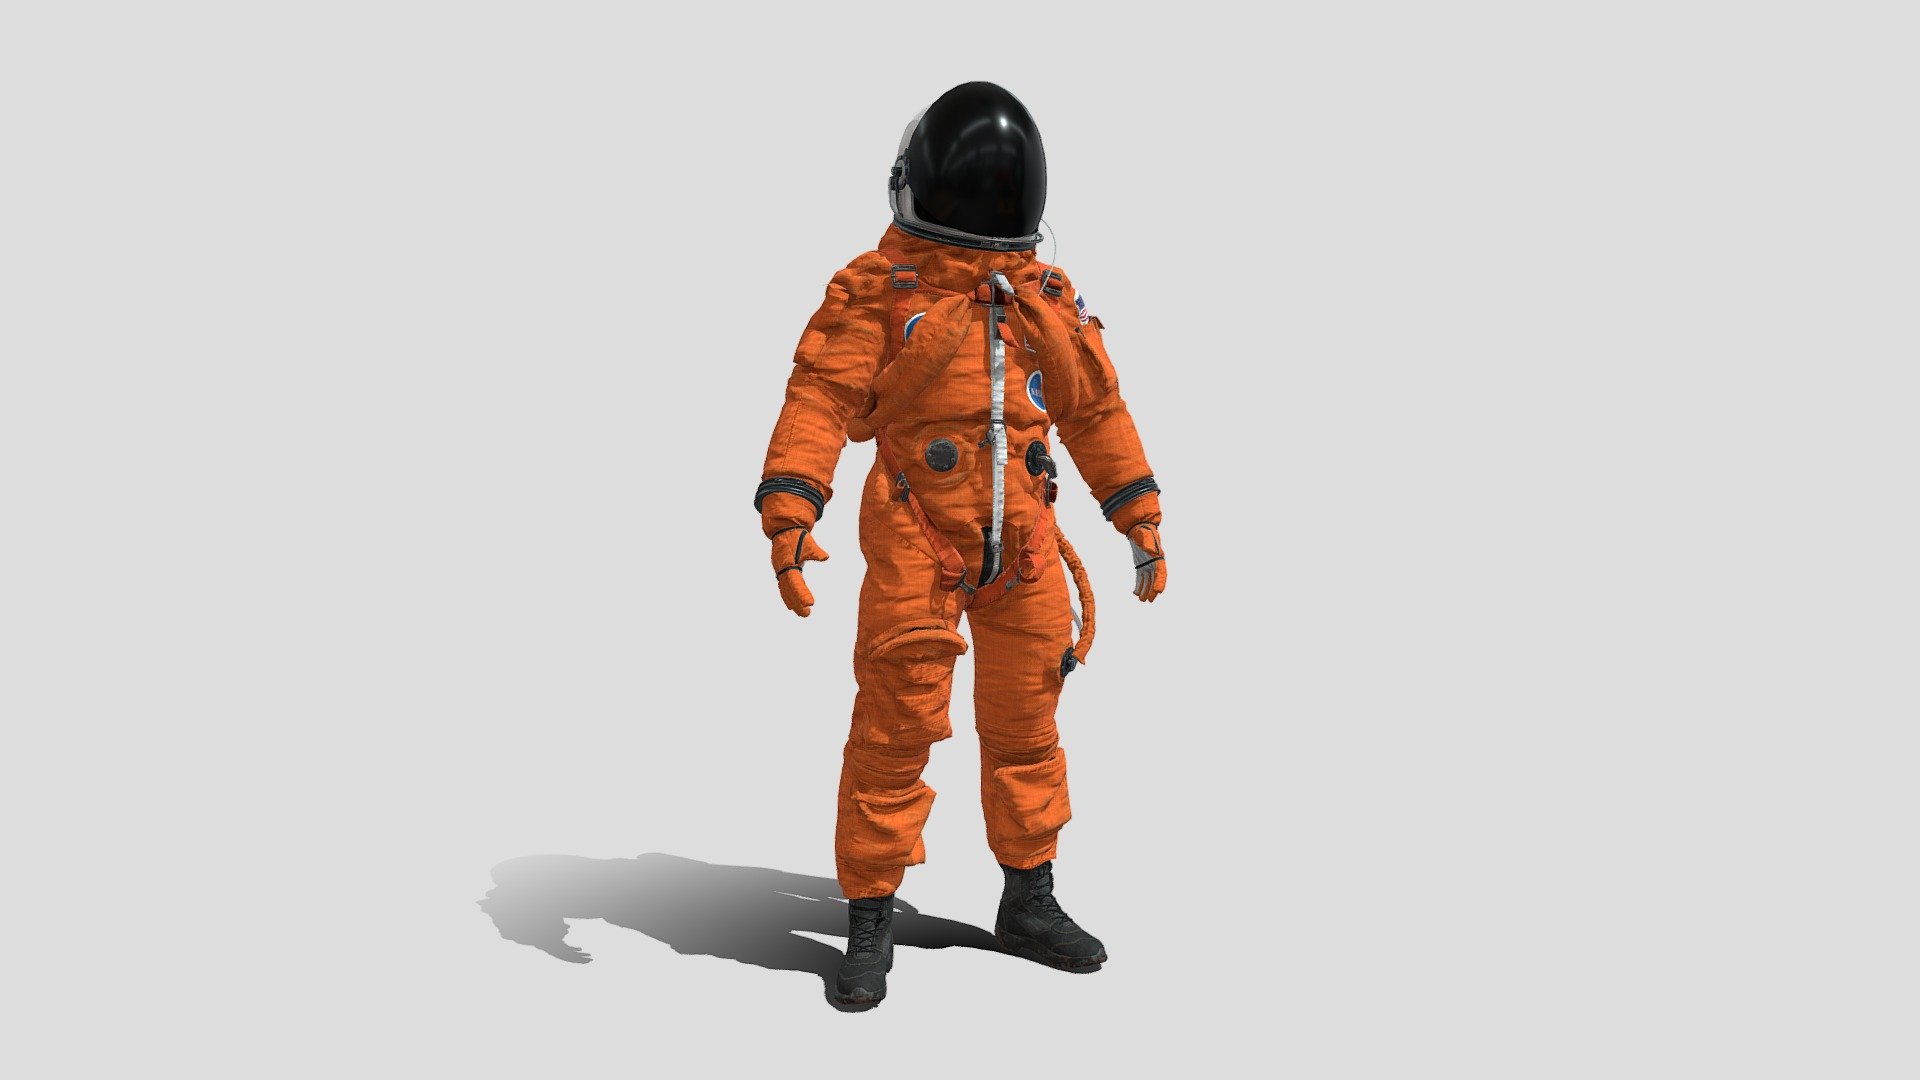 3D Advanced crew escape suit astronaut modeled in high precision. 

Used in the space shuttle nasa program ( atlantis, endeavor, dicovery, challenger, columbia, enterprise )
this is a mix between several references i found. this model has been accurately recreated in 3d High poly to keep every details.

The Quality you need :

First of all, this model was based on a several pictures and close up of the real product to provide you the best quality in terms of texture references and proportions.

The entire model was textured with its accessories relying on references and actual products.

included :




4K Textures.

3ds MAX, V-ray 2017 &amp; 2014 ( Textured )

3ds MAX, Corona 2017 &amp; 2014 ( Textured )

3ds MAX, Legacy Physical shader 2017 &amp; 2014 ( Textured )

Blender, Cycles 2.79 &amp; 2.8( Textured )

FBX ( Mesh Only )

OBJ ( Mesh Only )

ABC ( Mesh Only )
 - Nasa Aces Spacesuit - 3D model by Albin (@albinmerle) 3d model